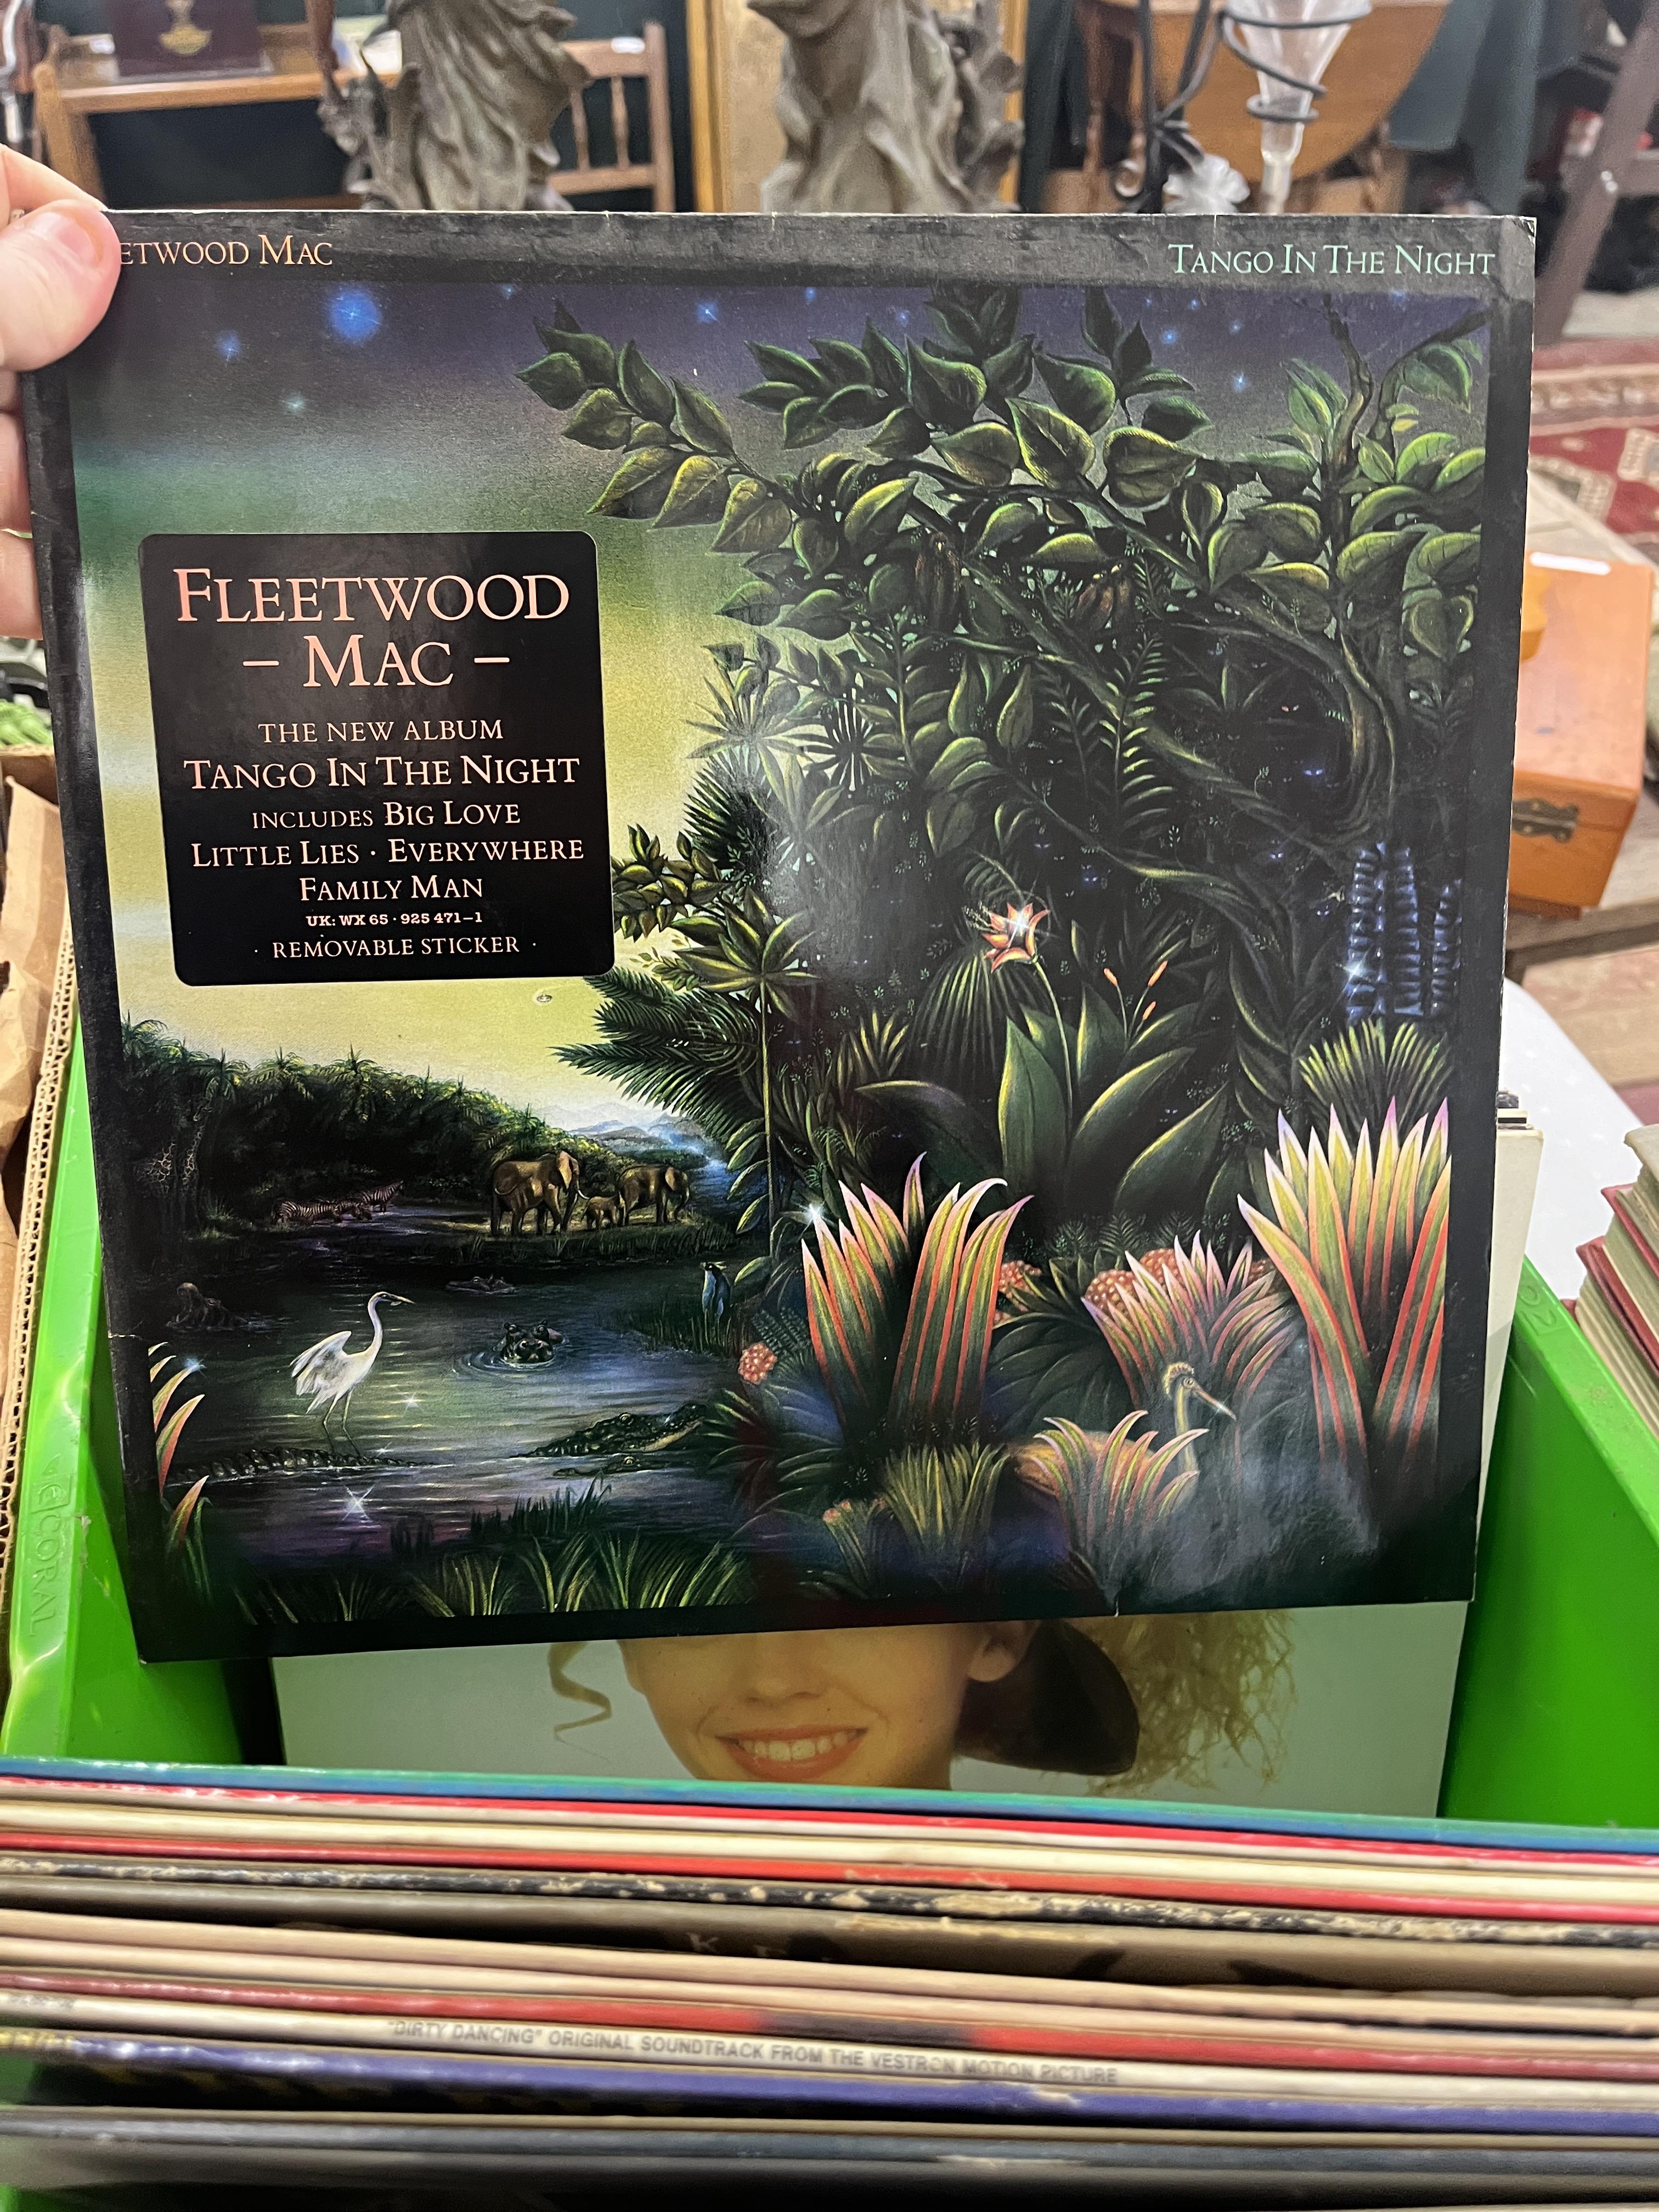 Collection of LPs to include Fleetwood Mac, Rod Stewart, etc. - Image 13 of 44